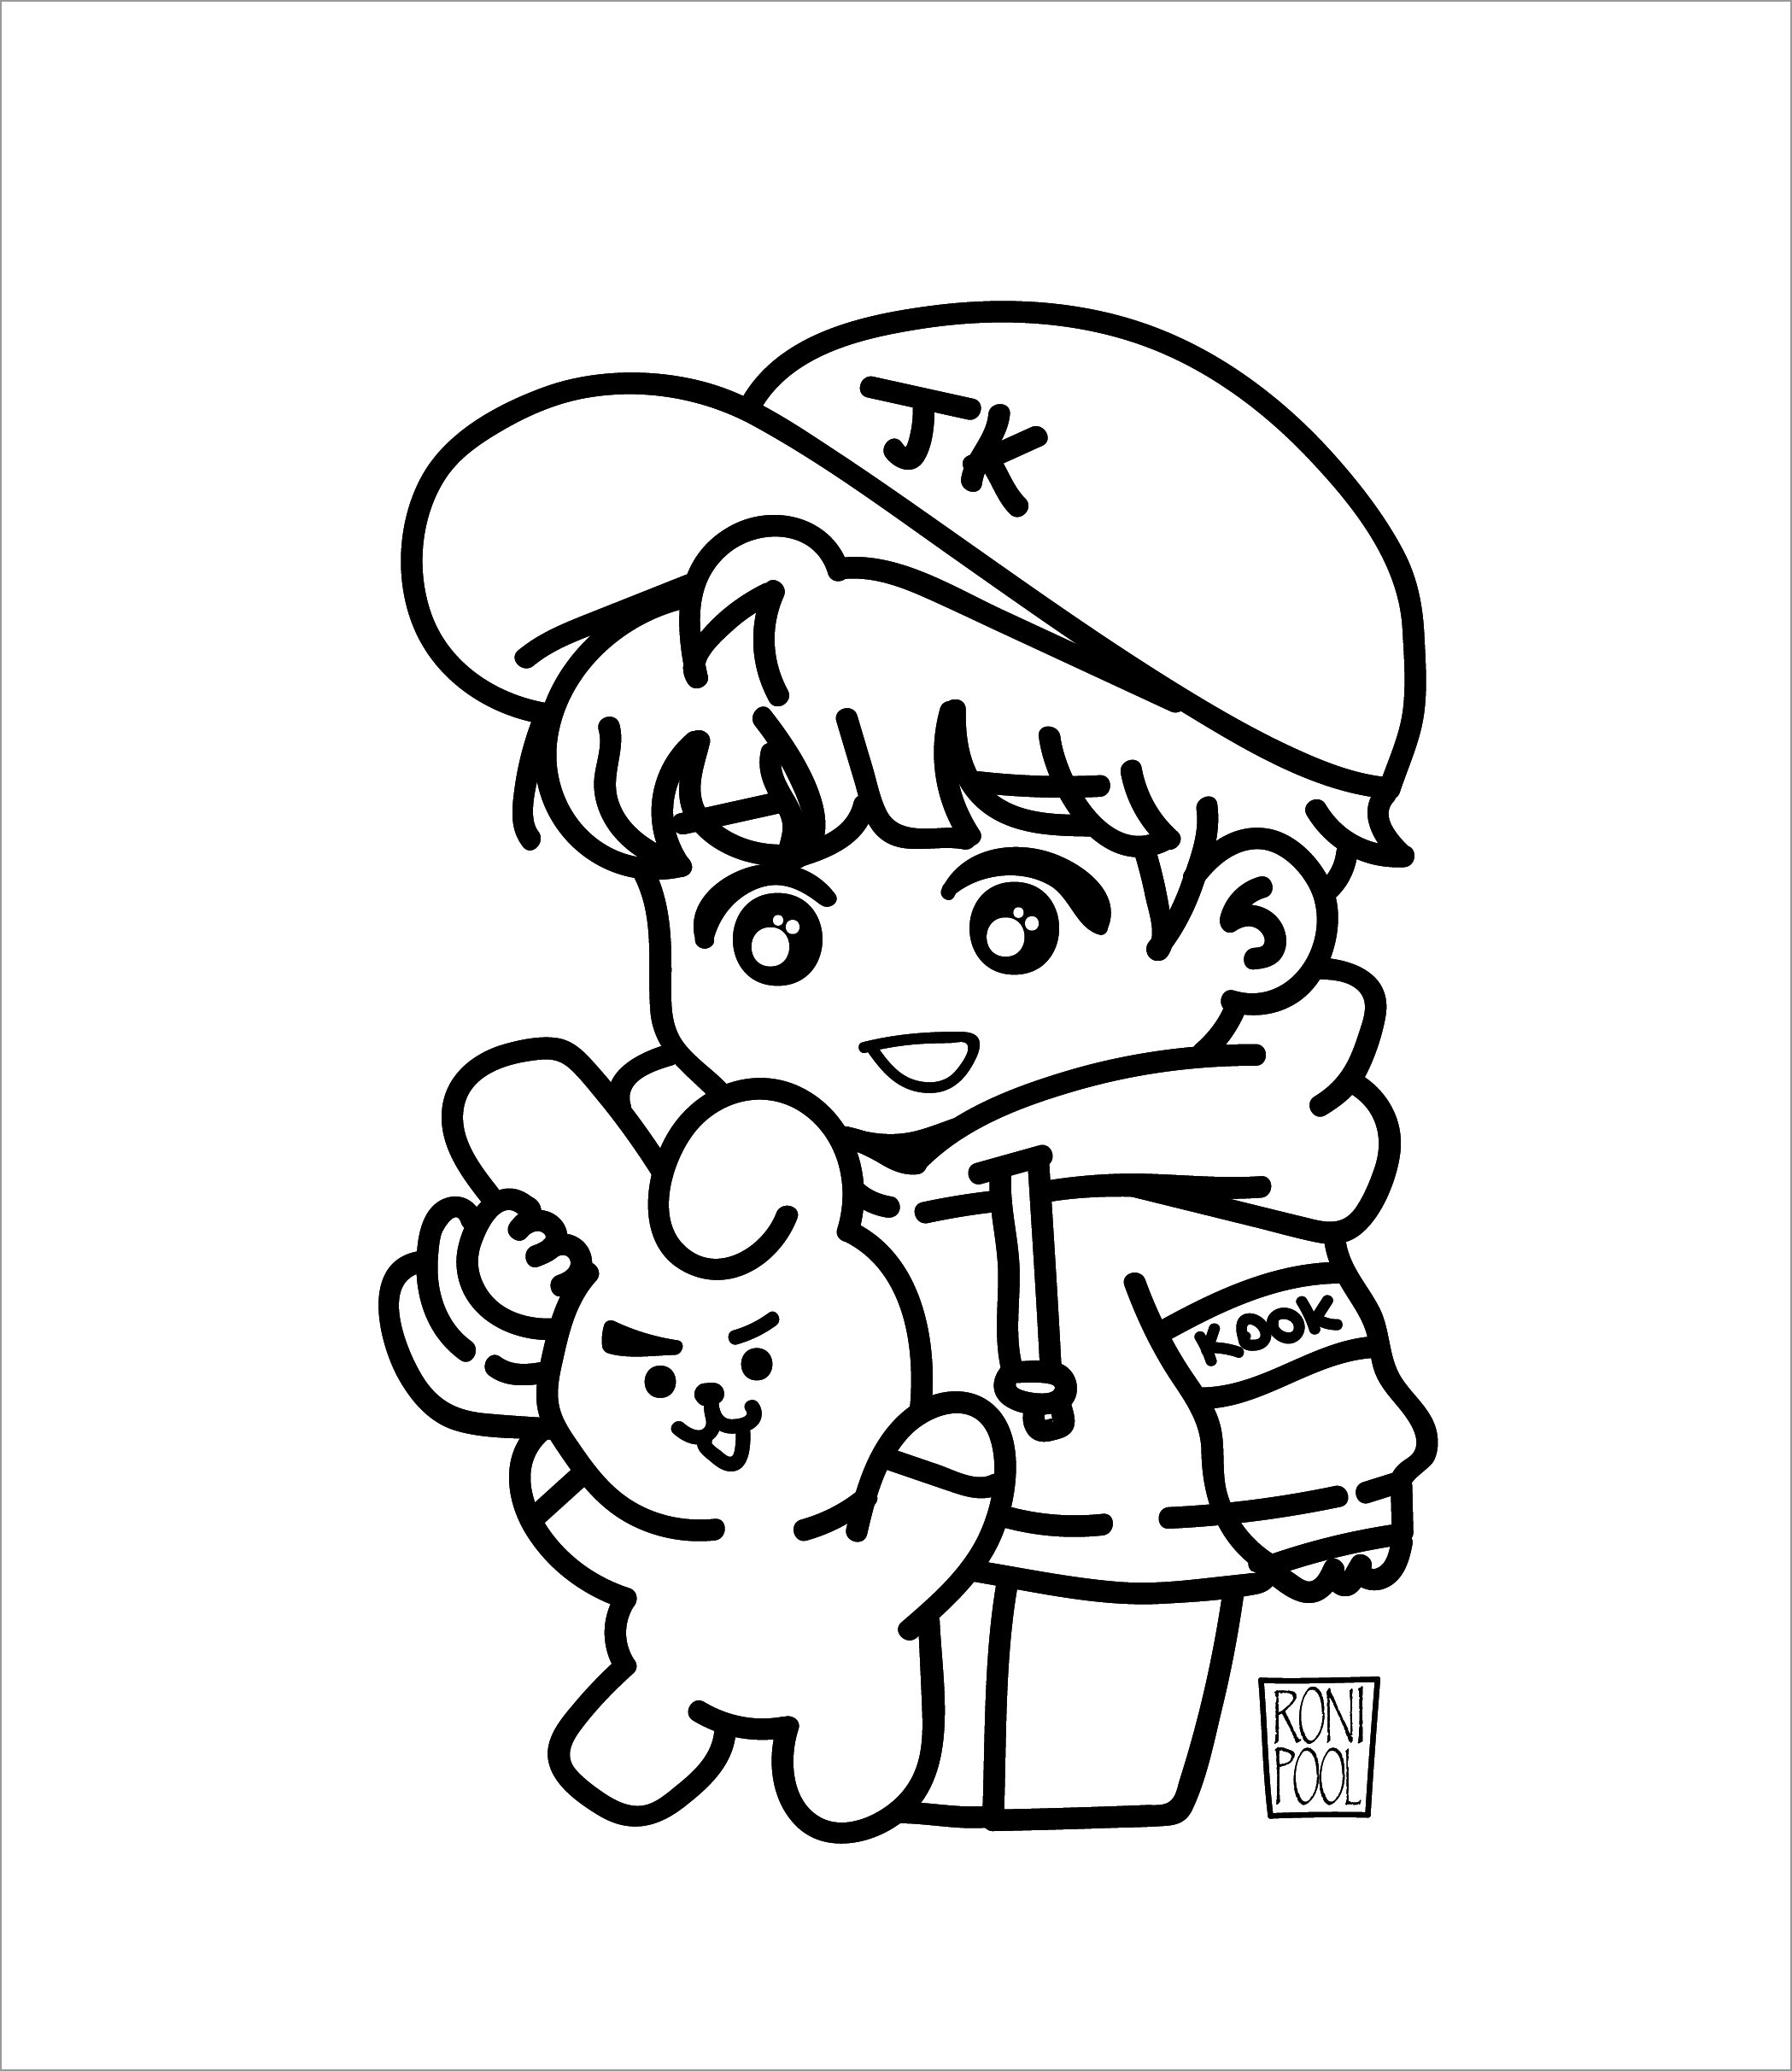 Bts Fanart Bt21 Cooky and Jungkook Chibi Coloring Page - ColoringBay